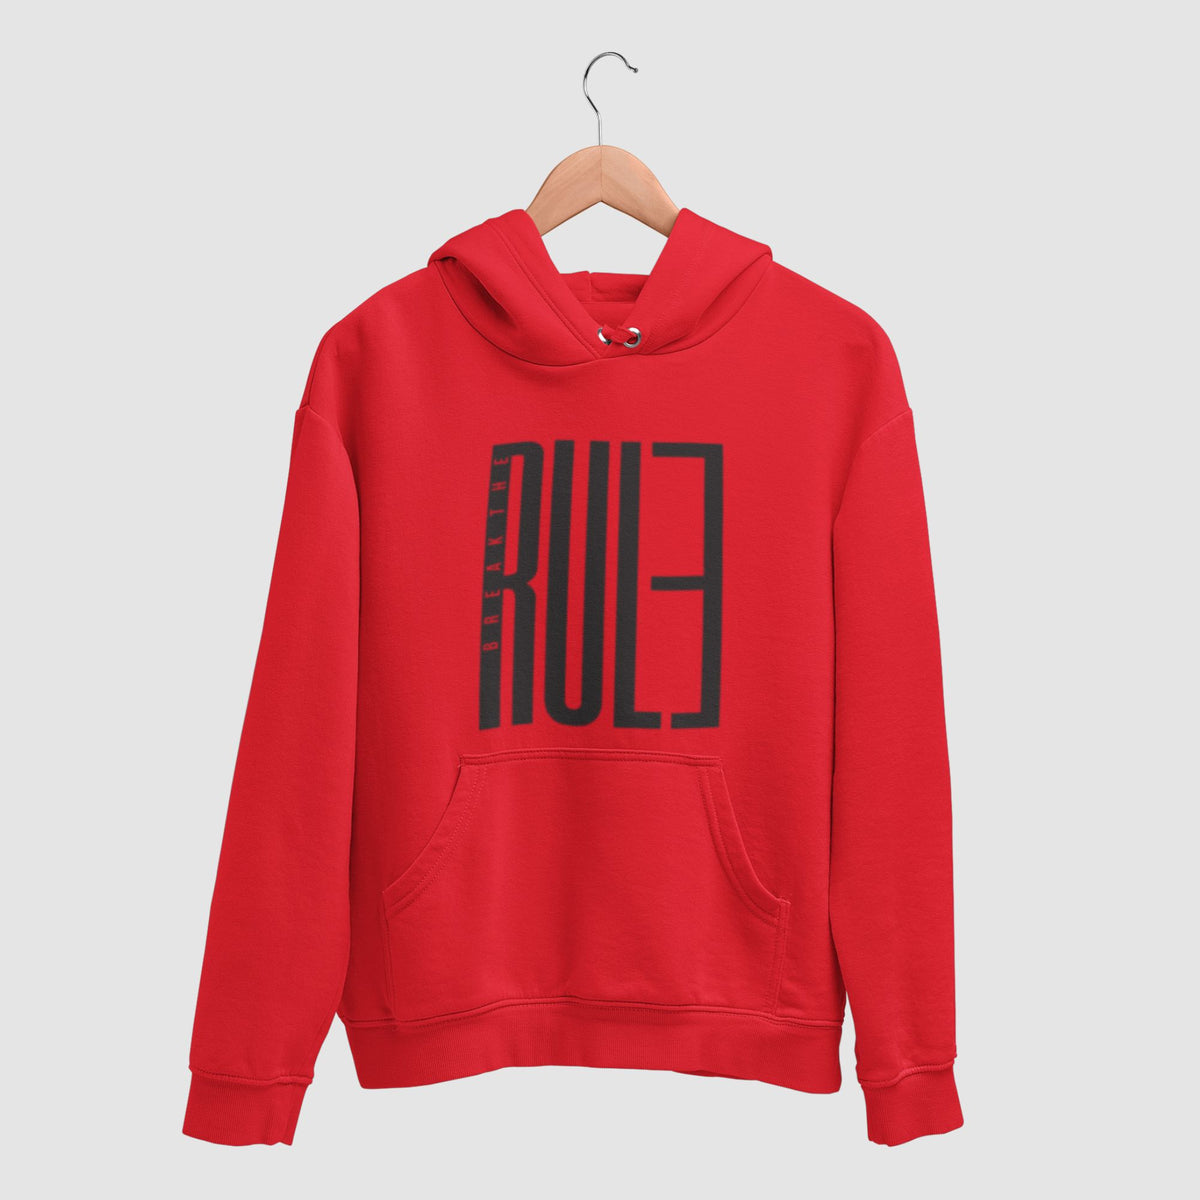 break-the-rule-cotton-printed-unisex-red-hoodie-for-men-for-women-gogirgit-com  #color_red